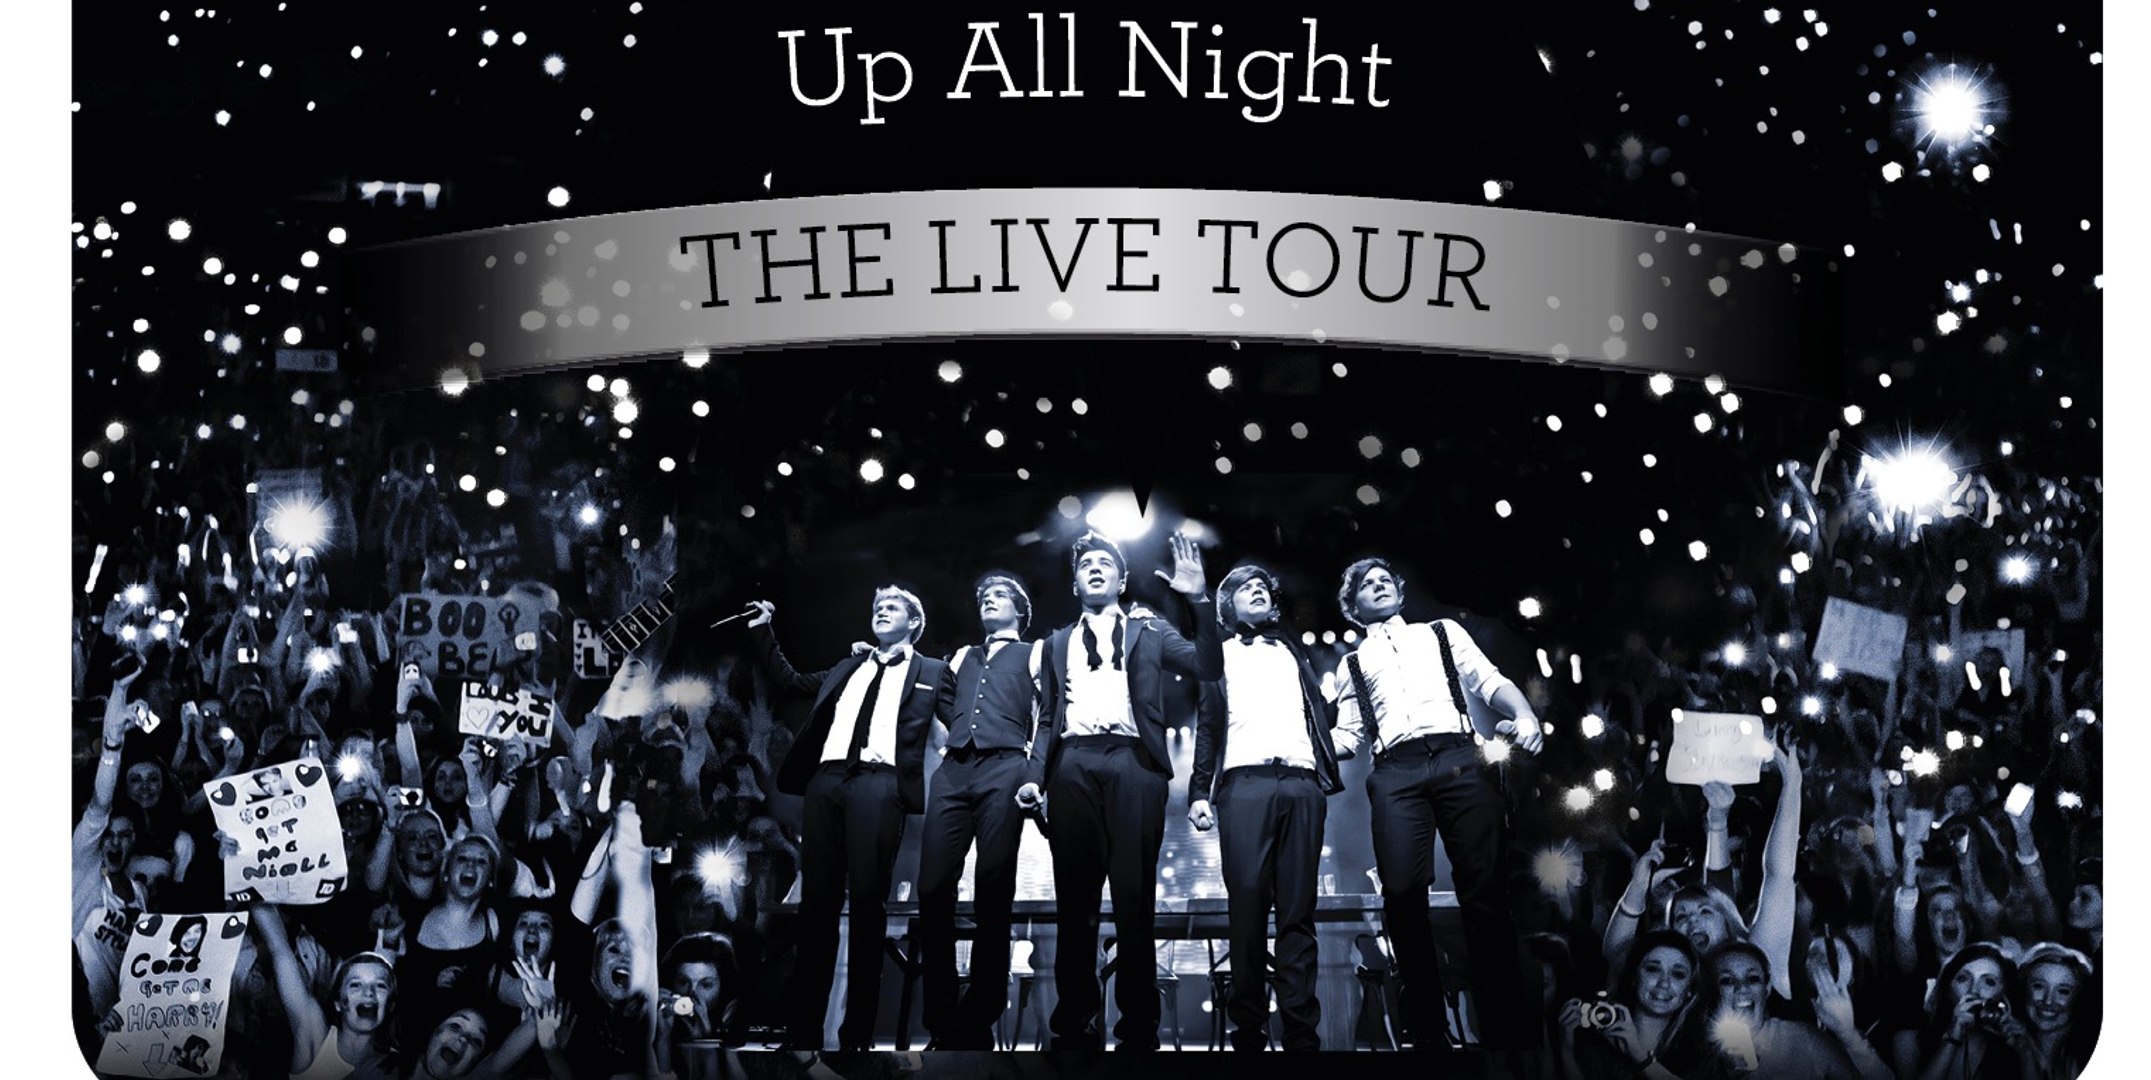 Live night up. One Direction up all Night. Up all Night фанфик. Up all Night Tour. Up all Night перевод one Direction.